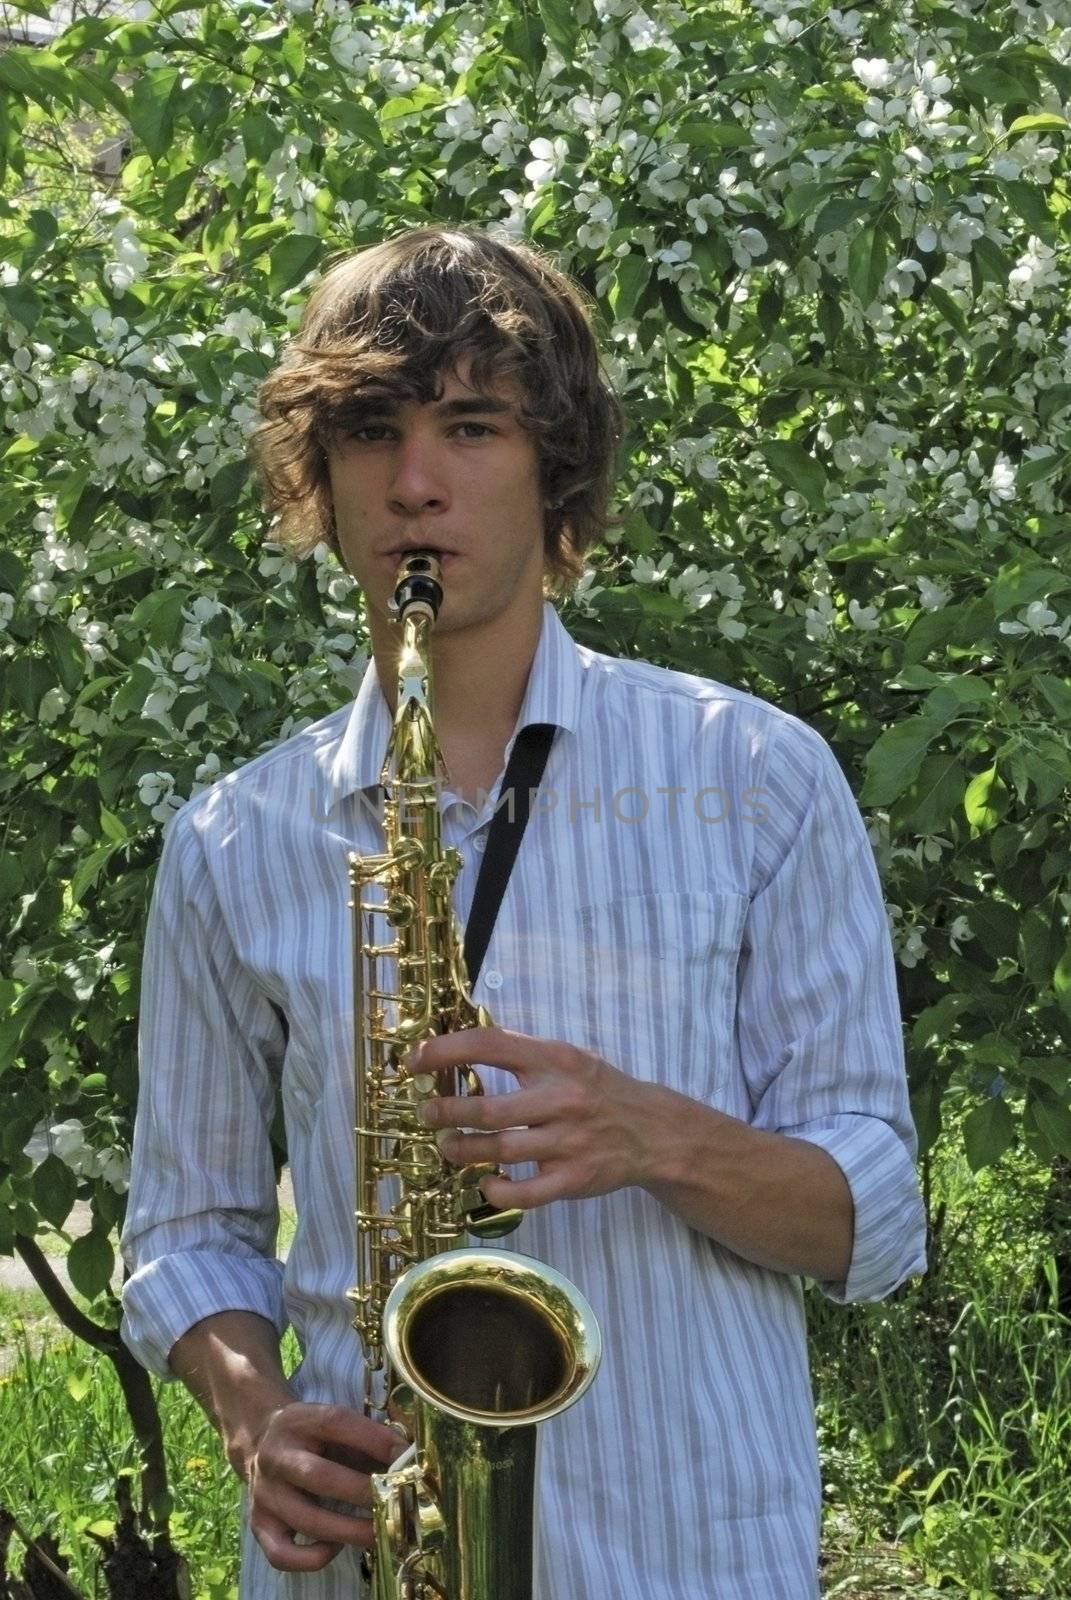 the young man with saxophone on the background of the flowering tree